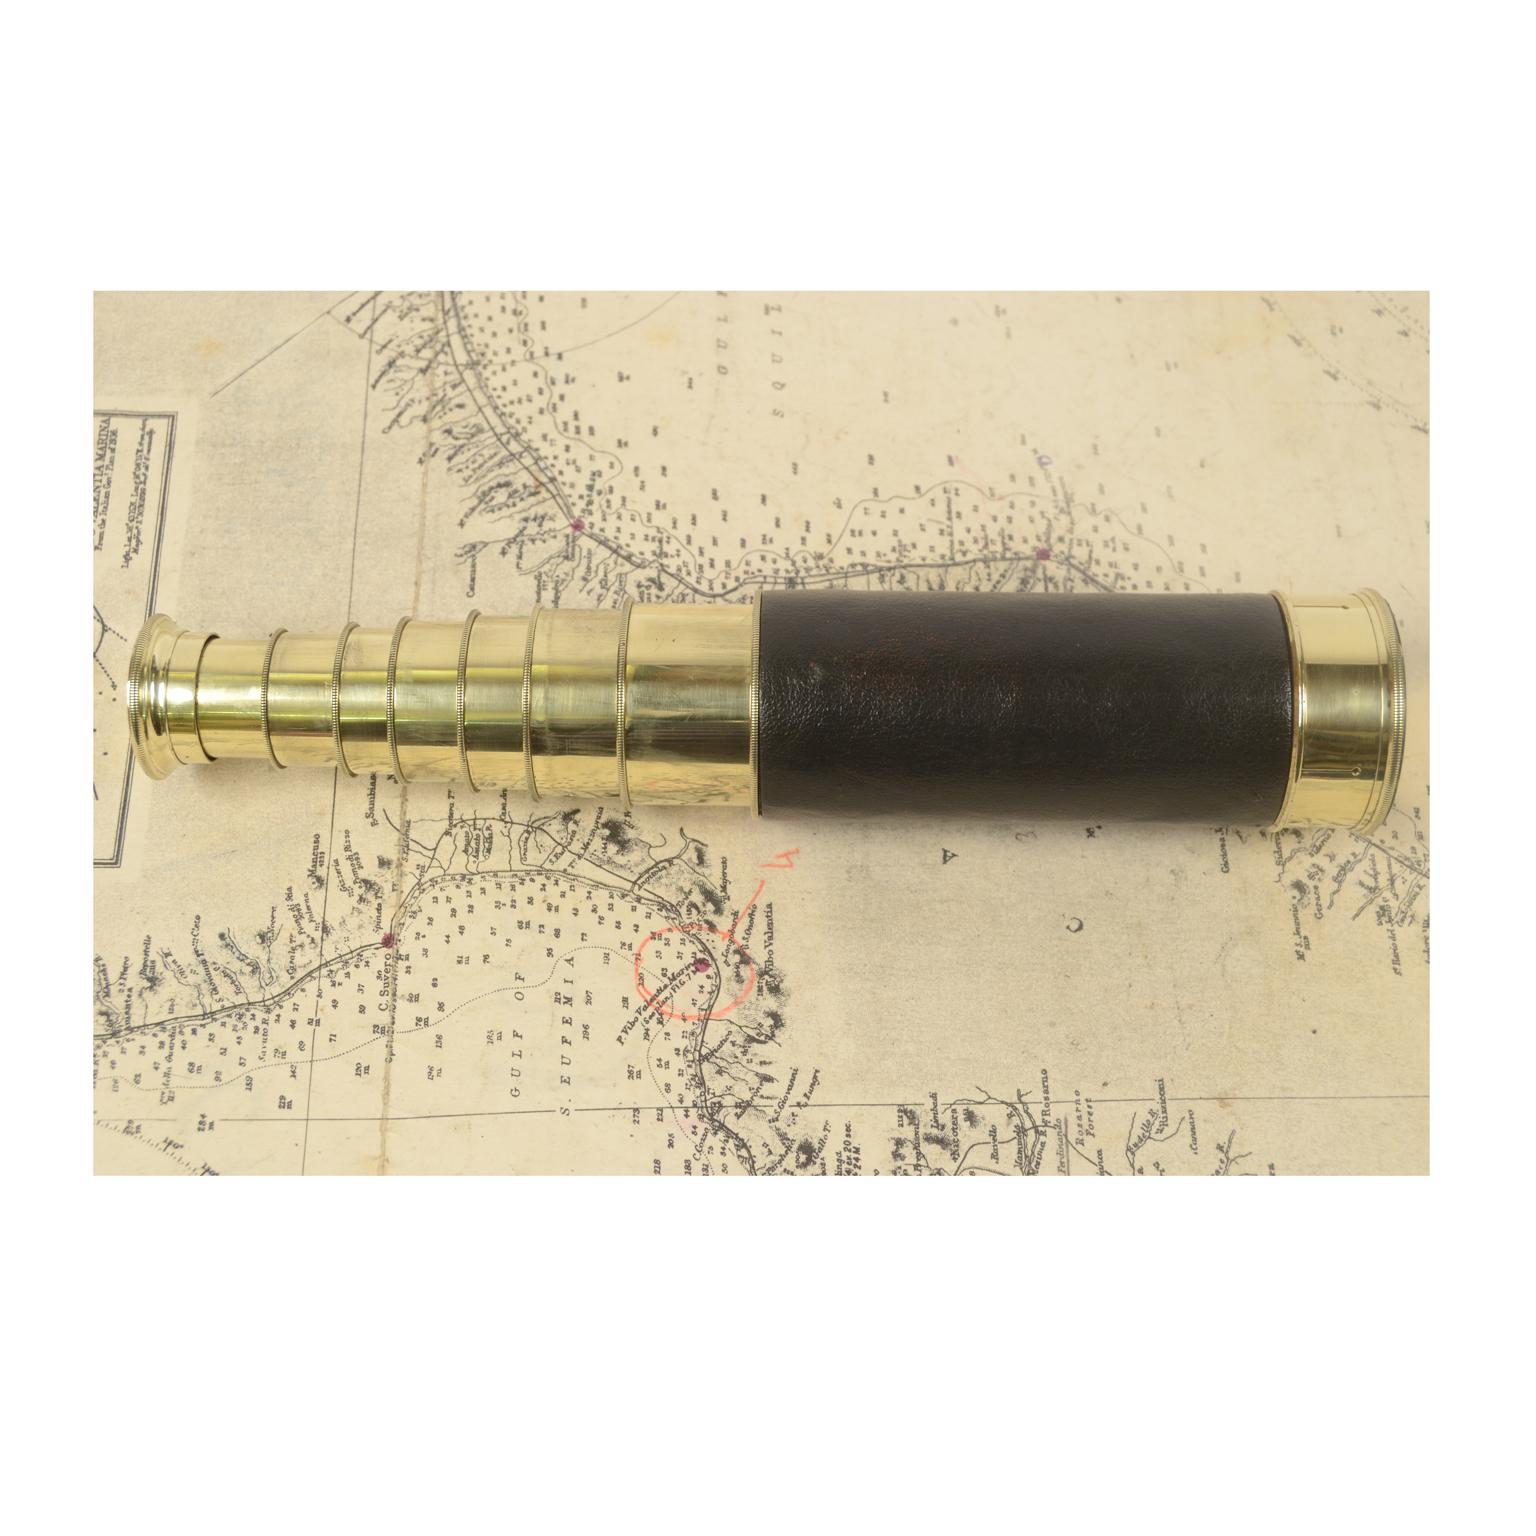 British Brass Telescope with Leather Handle, UK, Second Half of the 19th Century